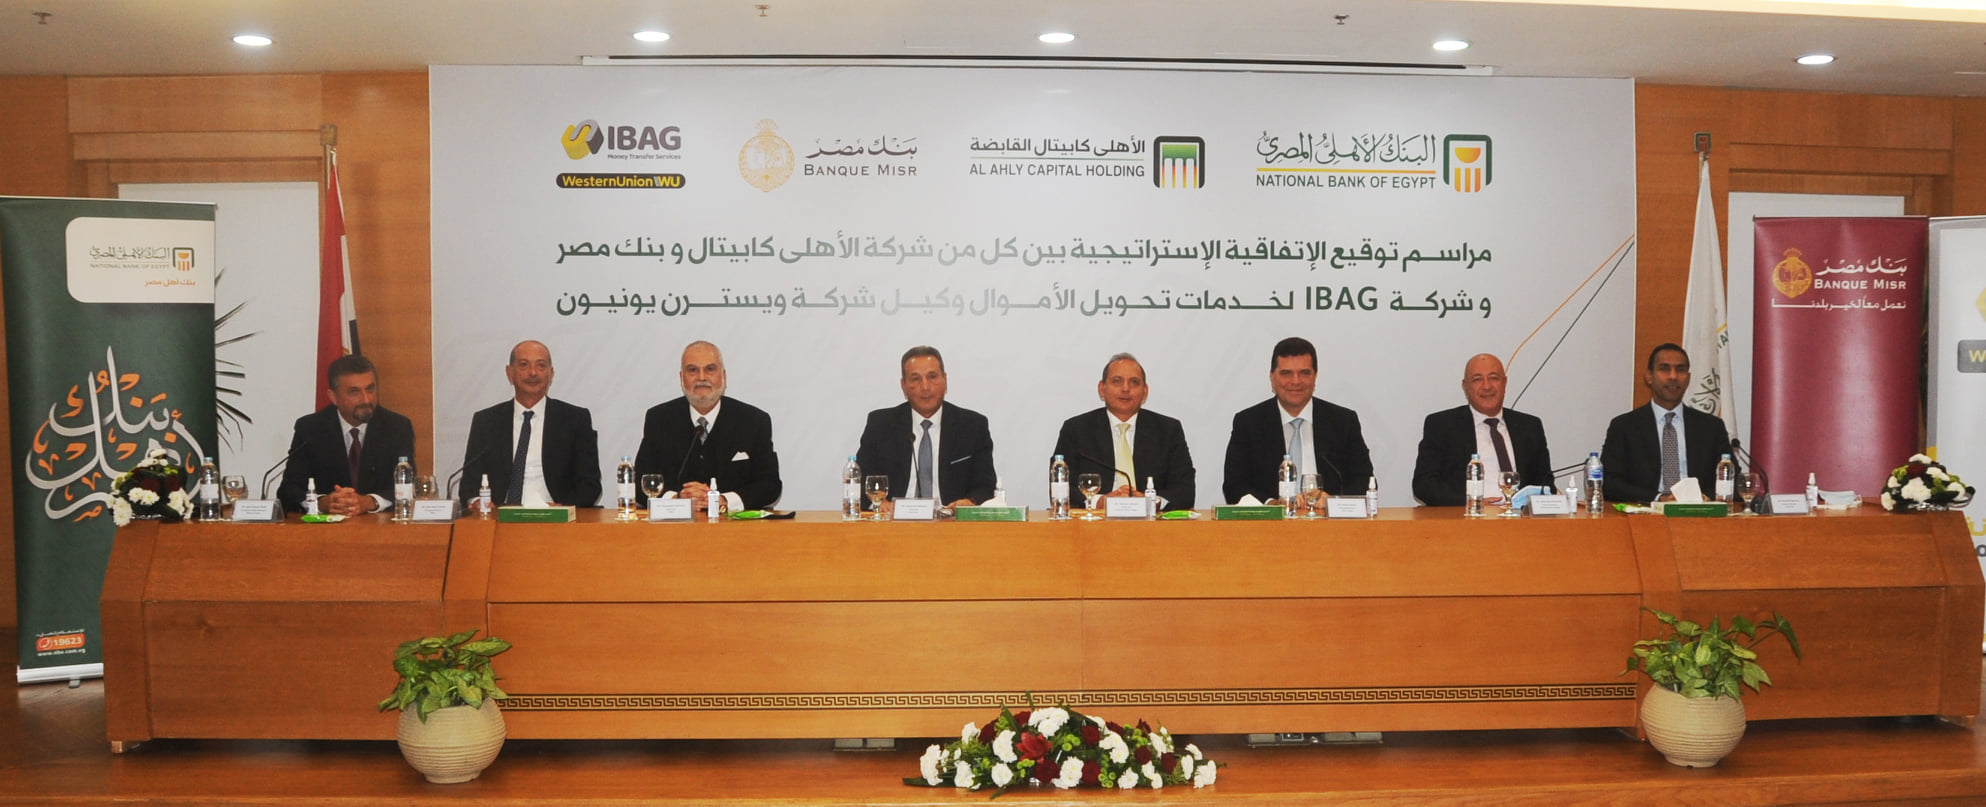 Banque Misr NBE IBAG Western Union